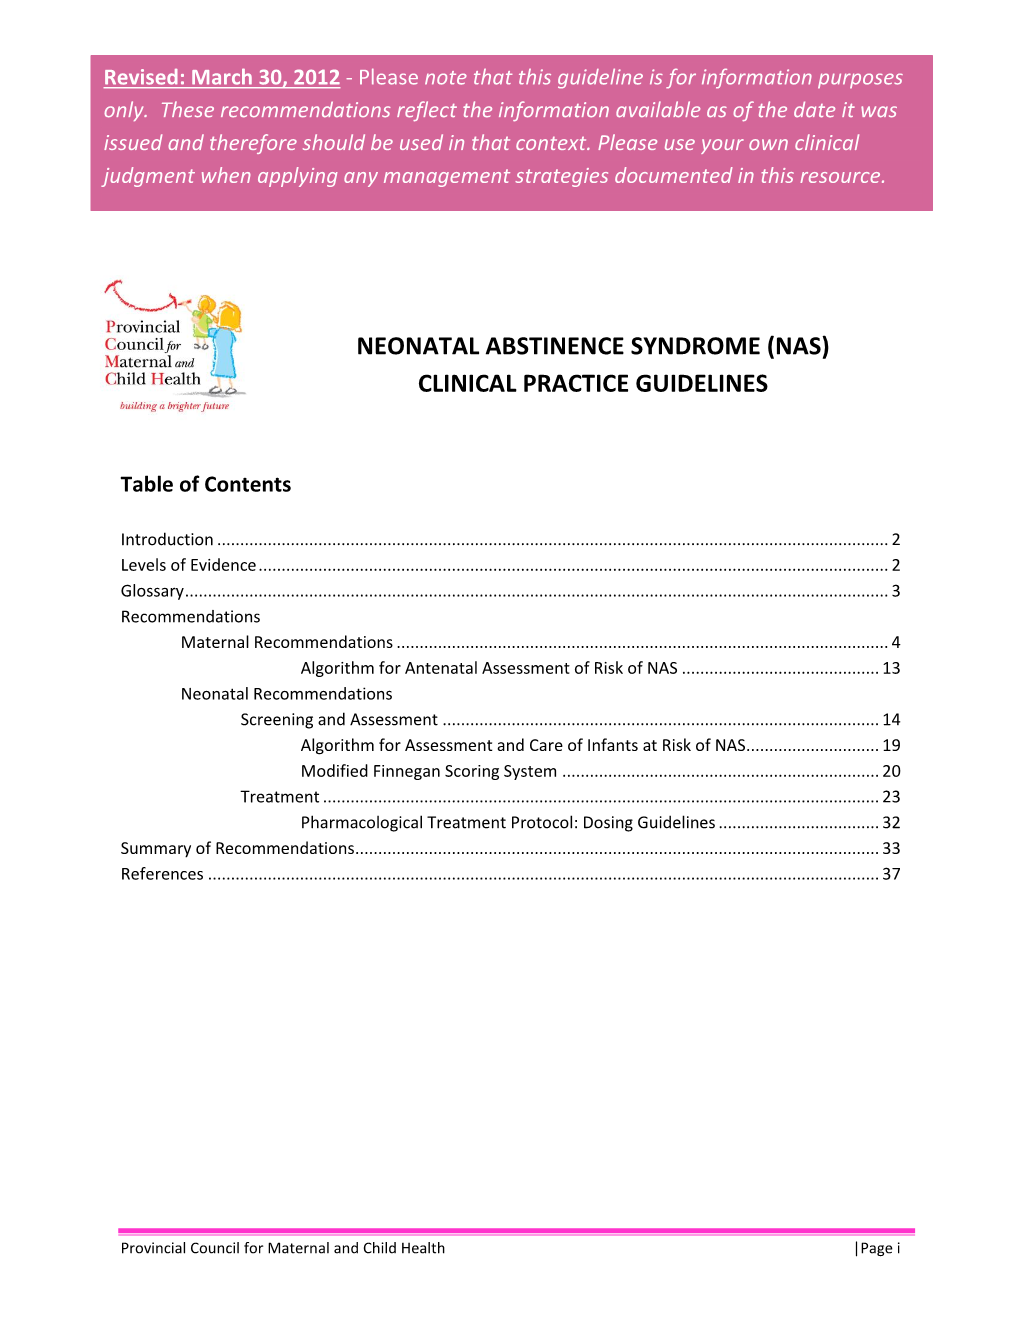 Neonatal Abstinence Syndrome (Nas) Clinical Practice Guidelines